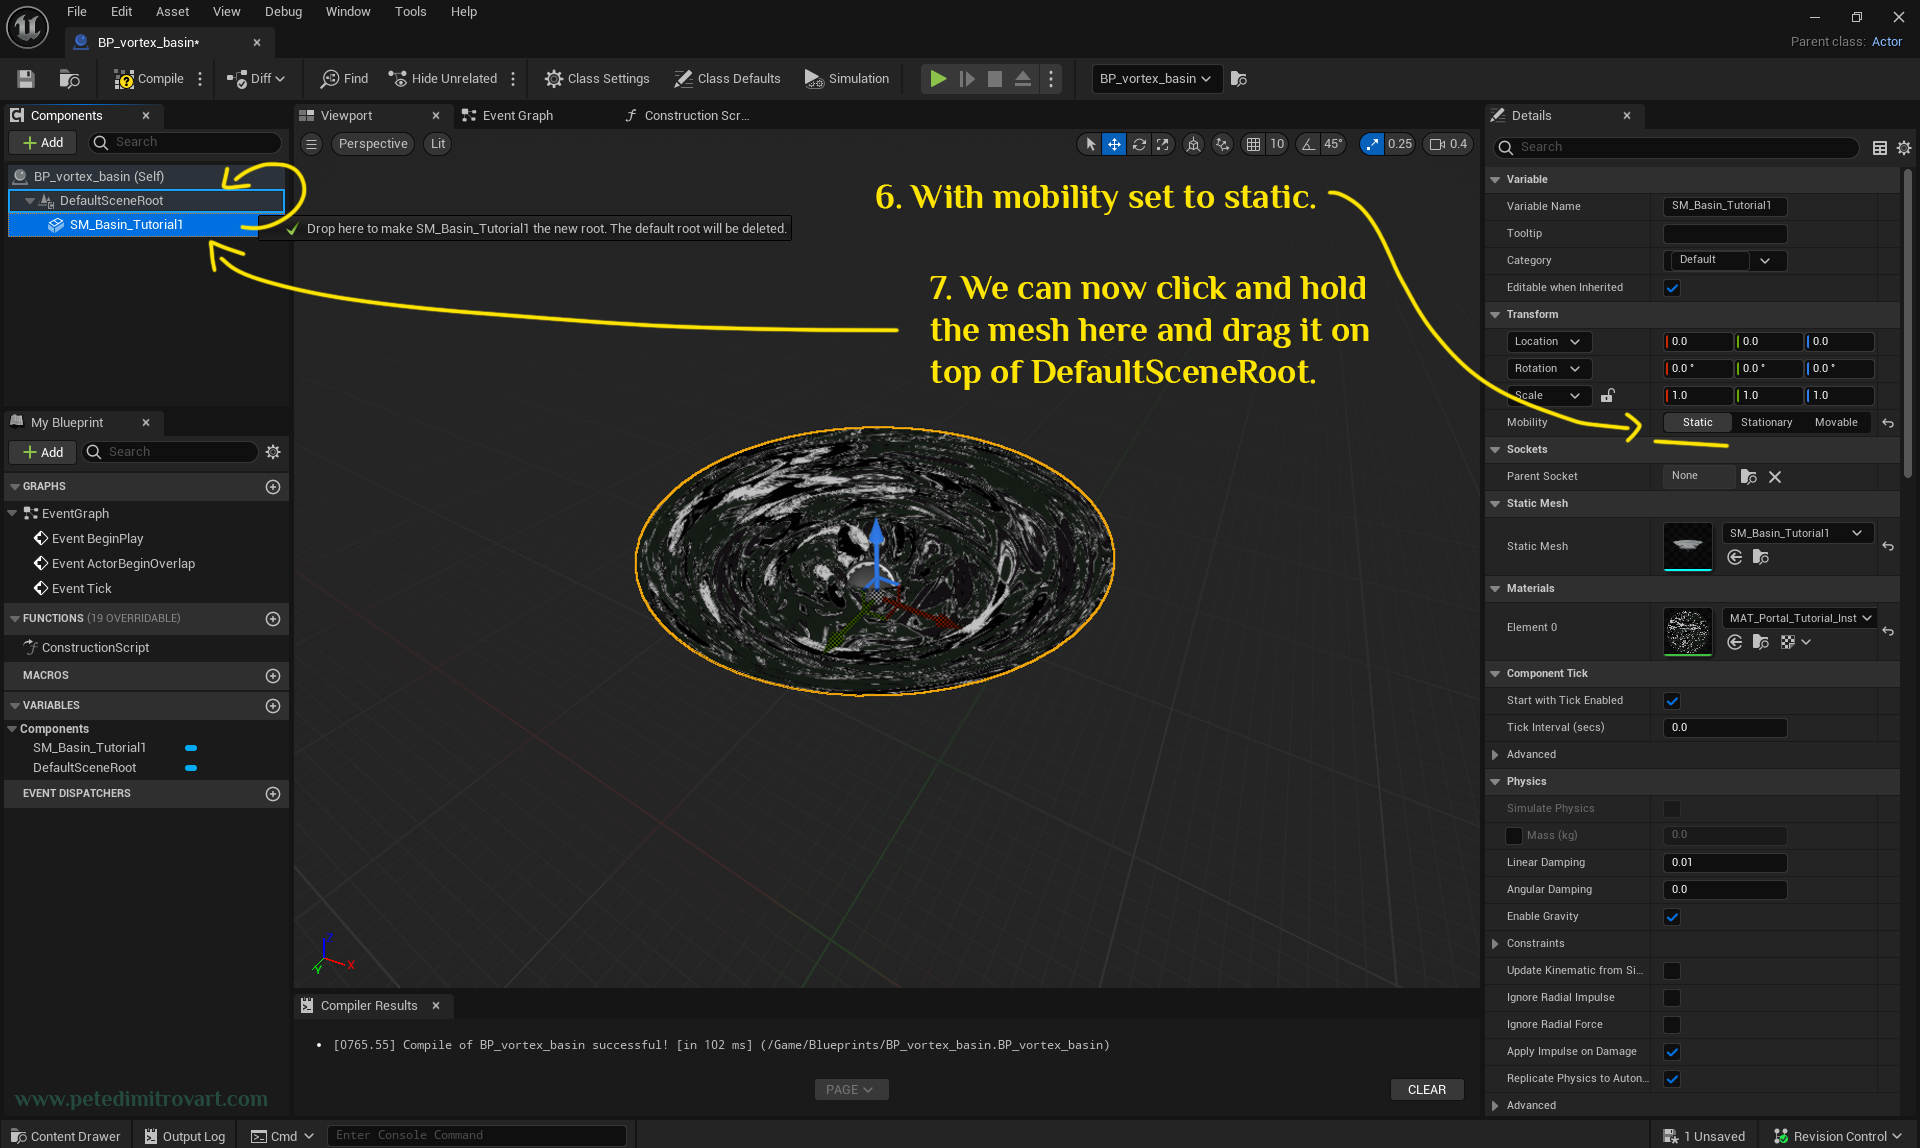 Screenshot showing selecting and dragging the static mesh of the vortex, in the hierarchy list of the blueprint on the left. The mesh is dragged on top of its parent that goes by the name “DefaultSceneRoot”.